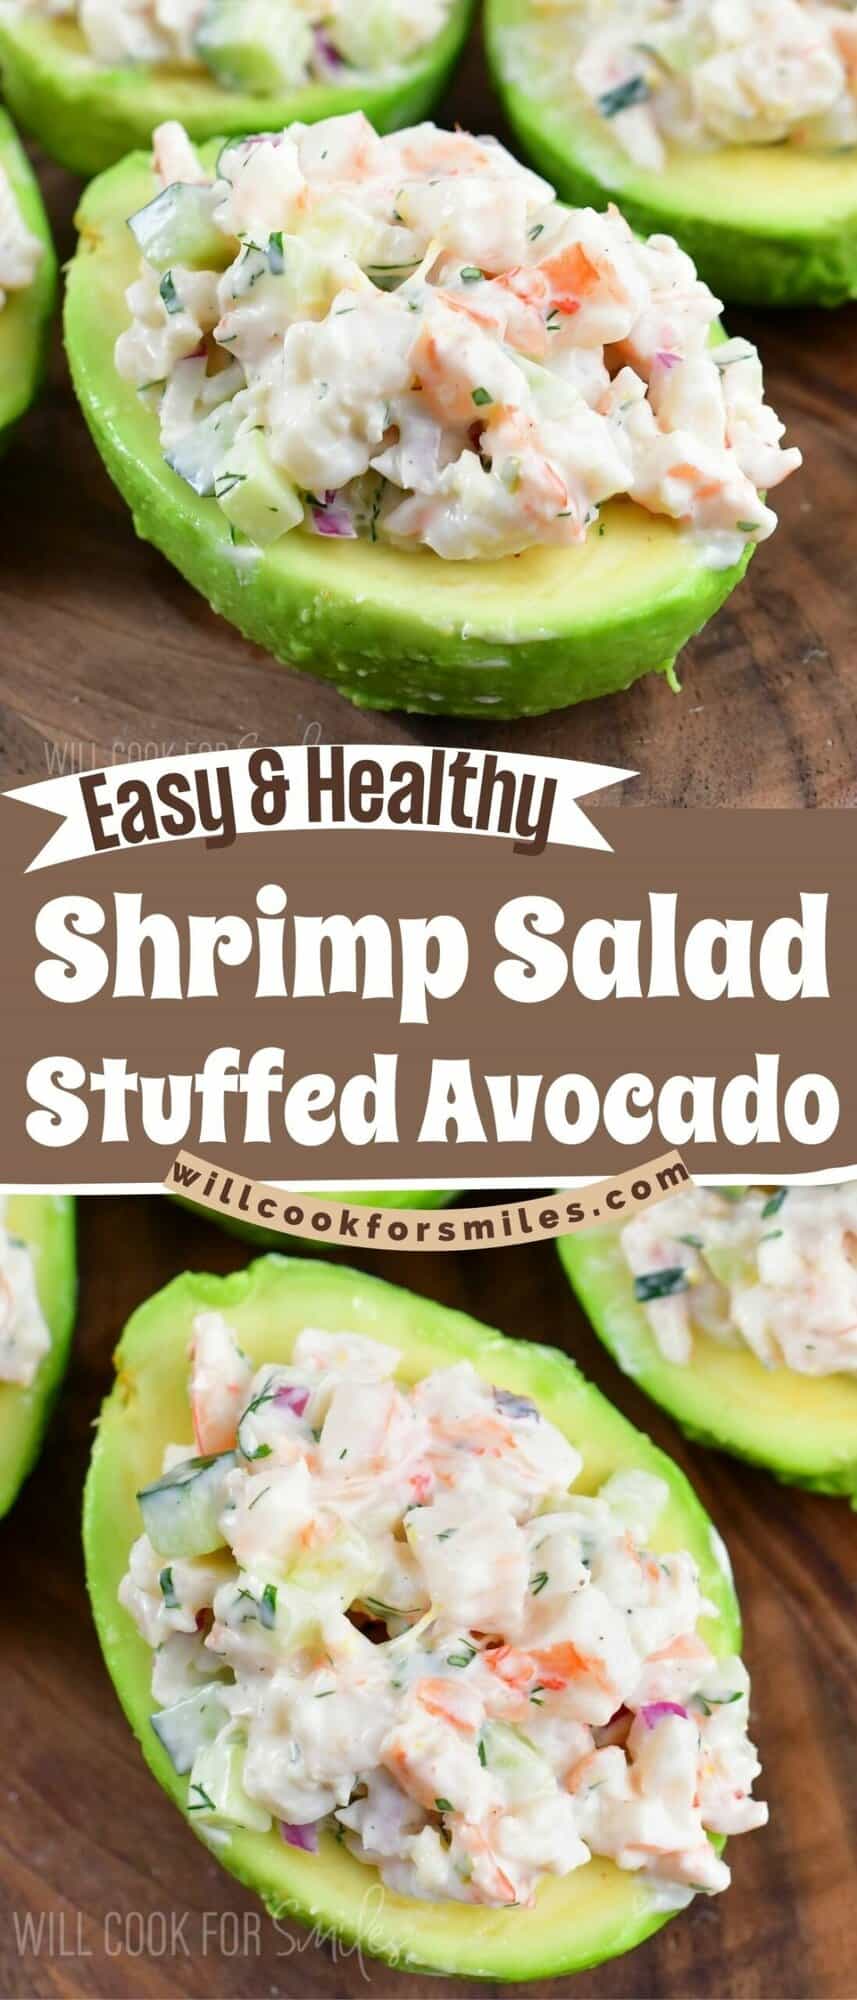 collage of two images of shrimp salad stuffed avocados and title.